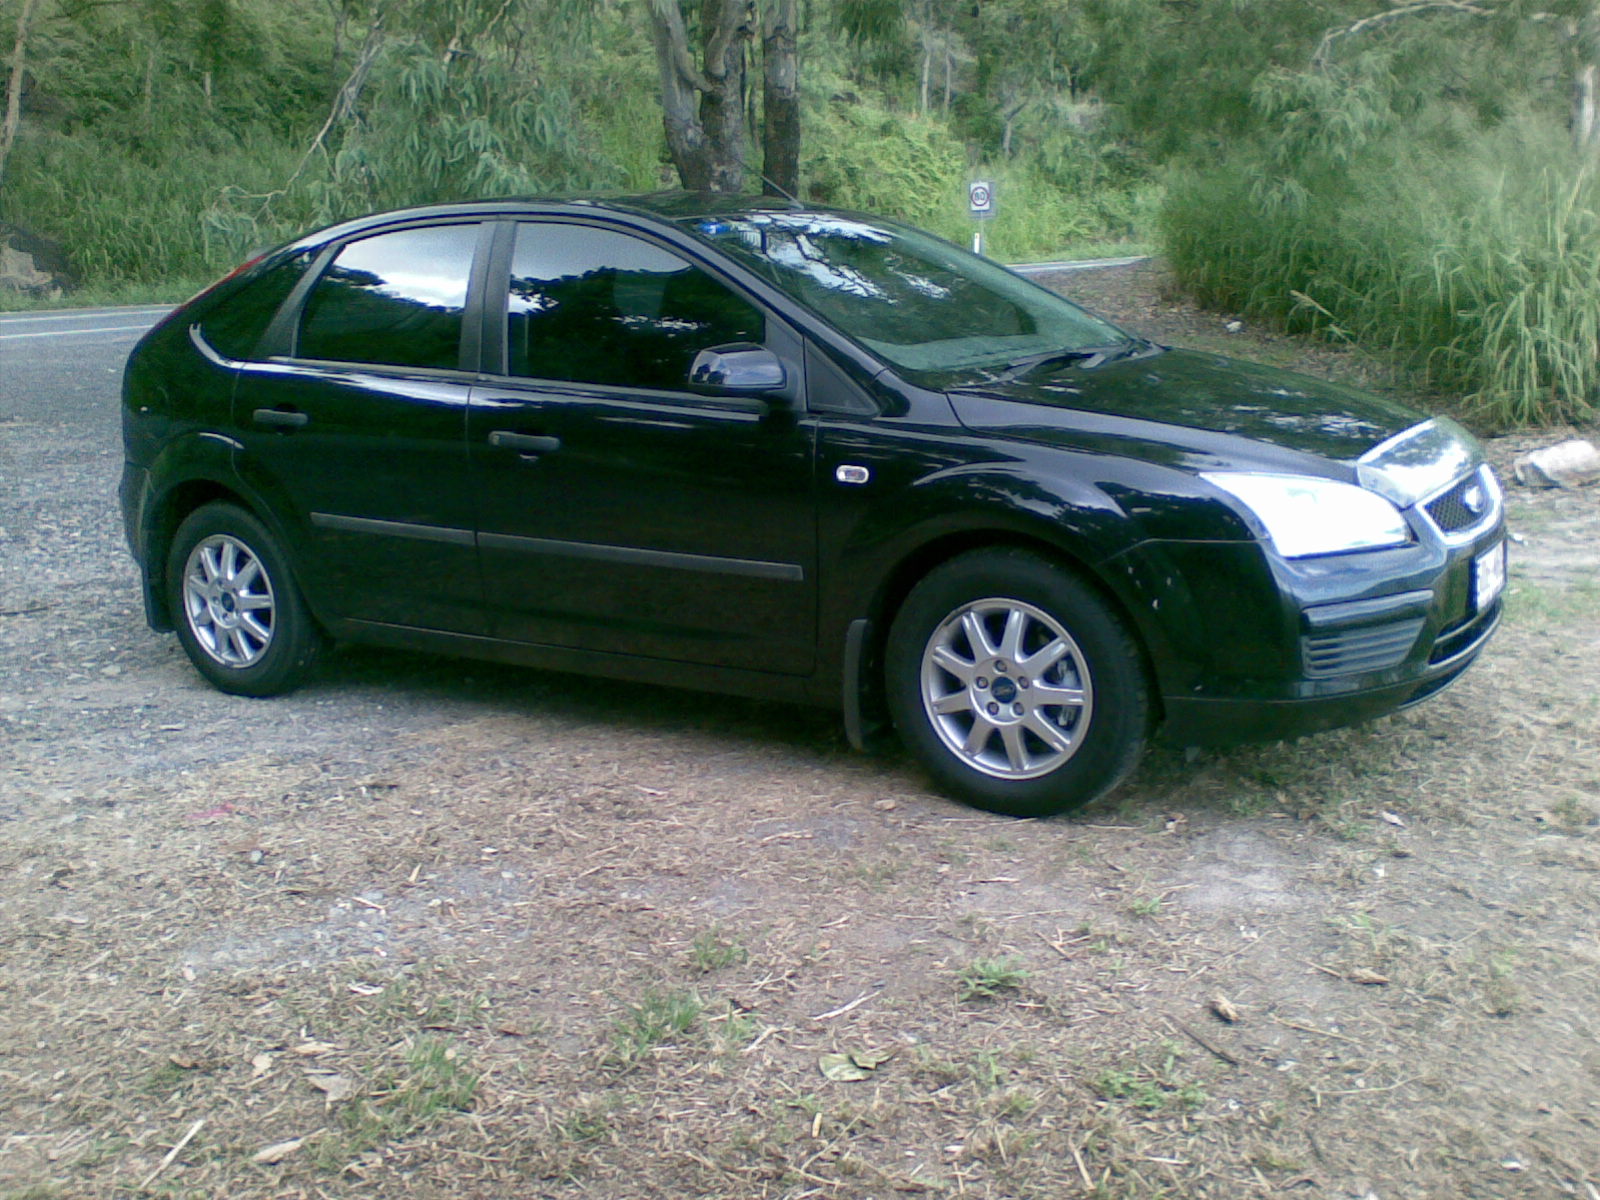 2007 Ford focus zx5 se specs #4